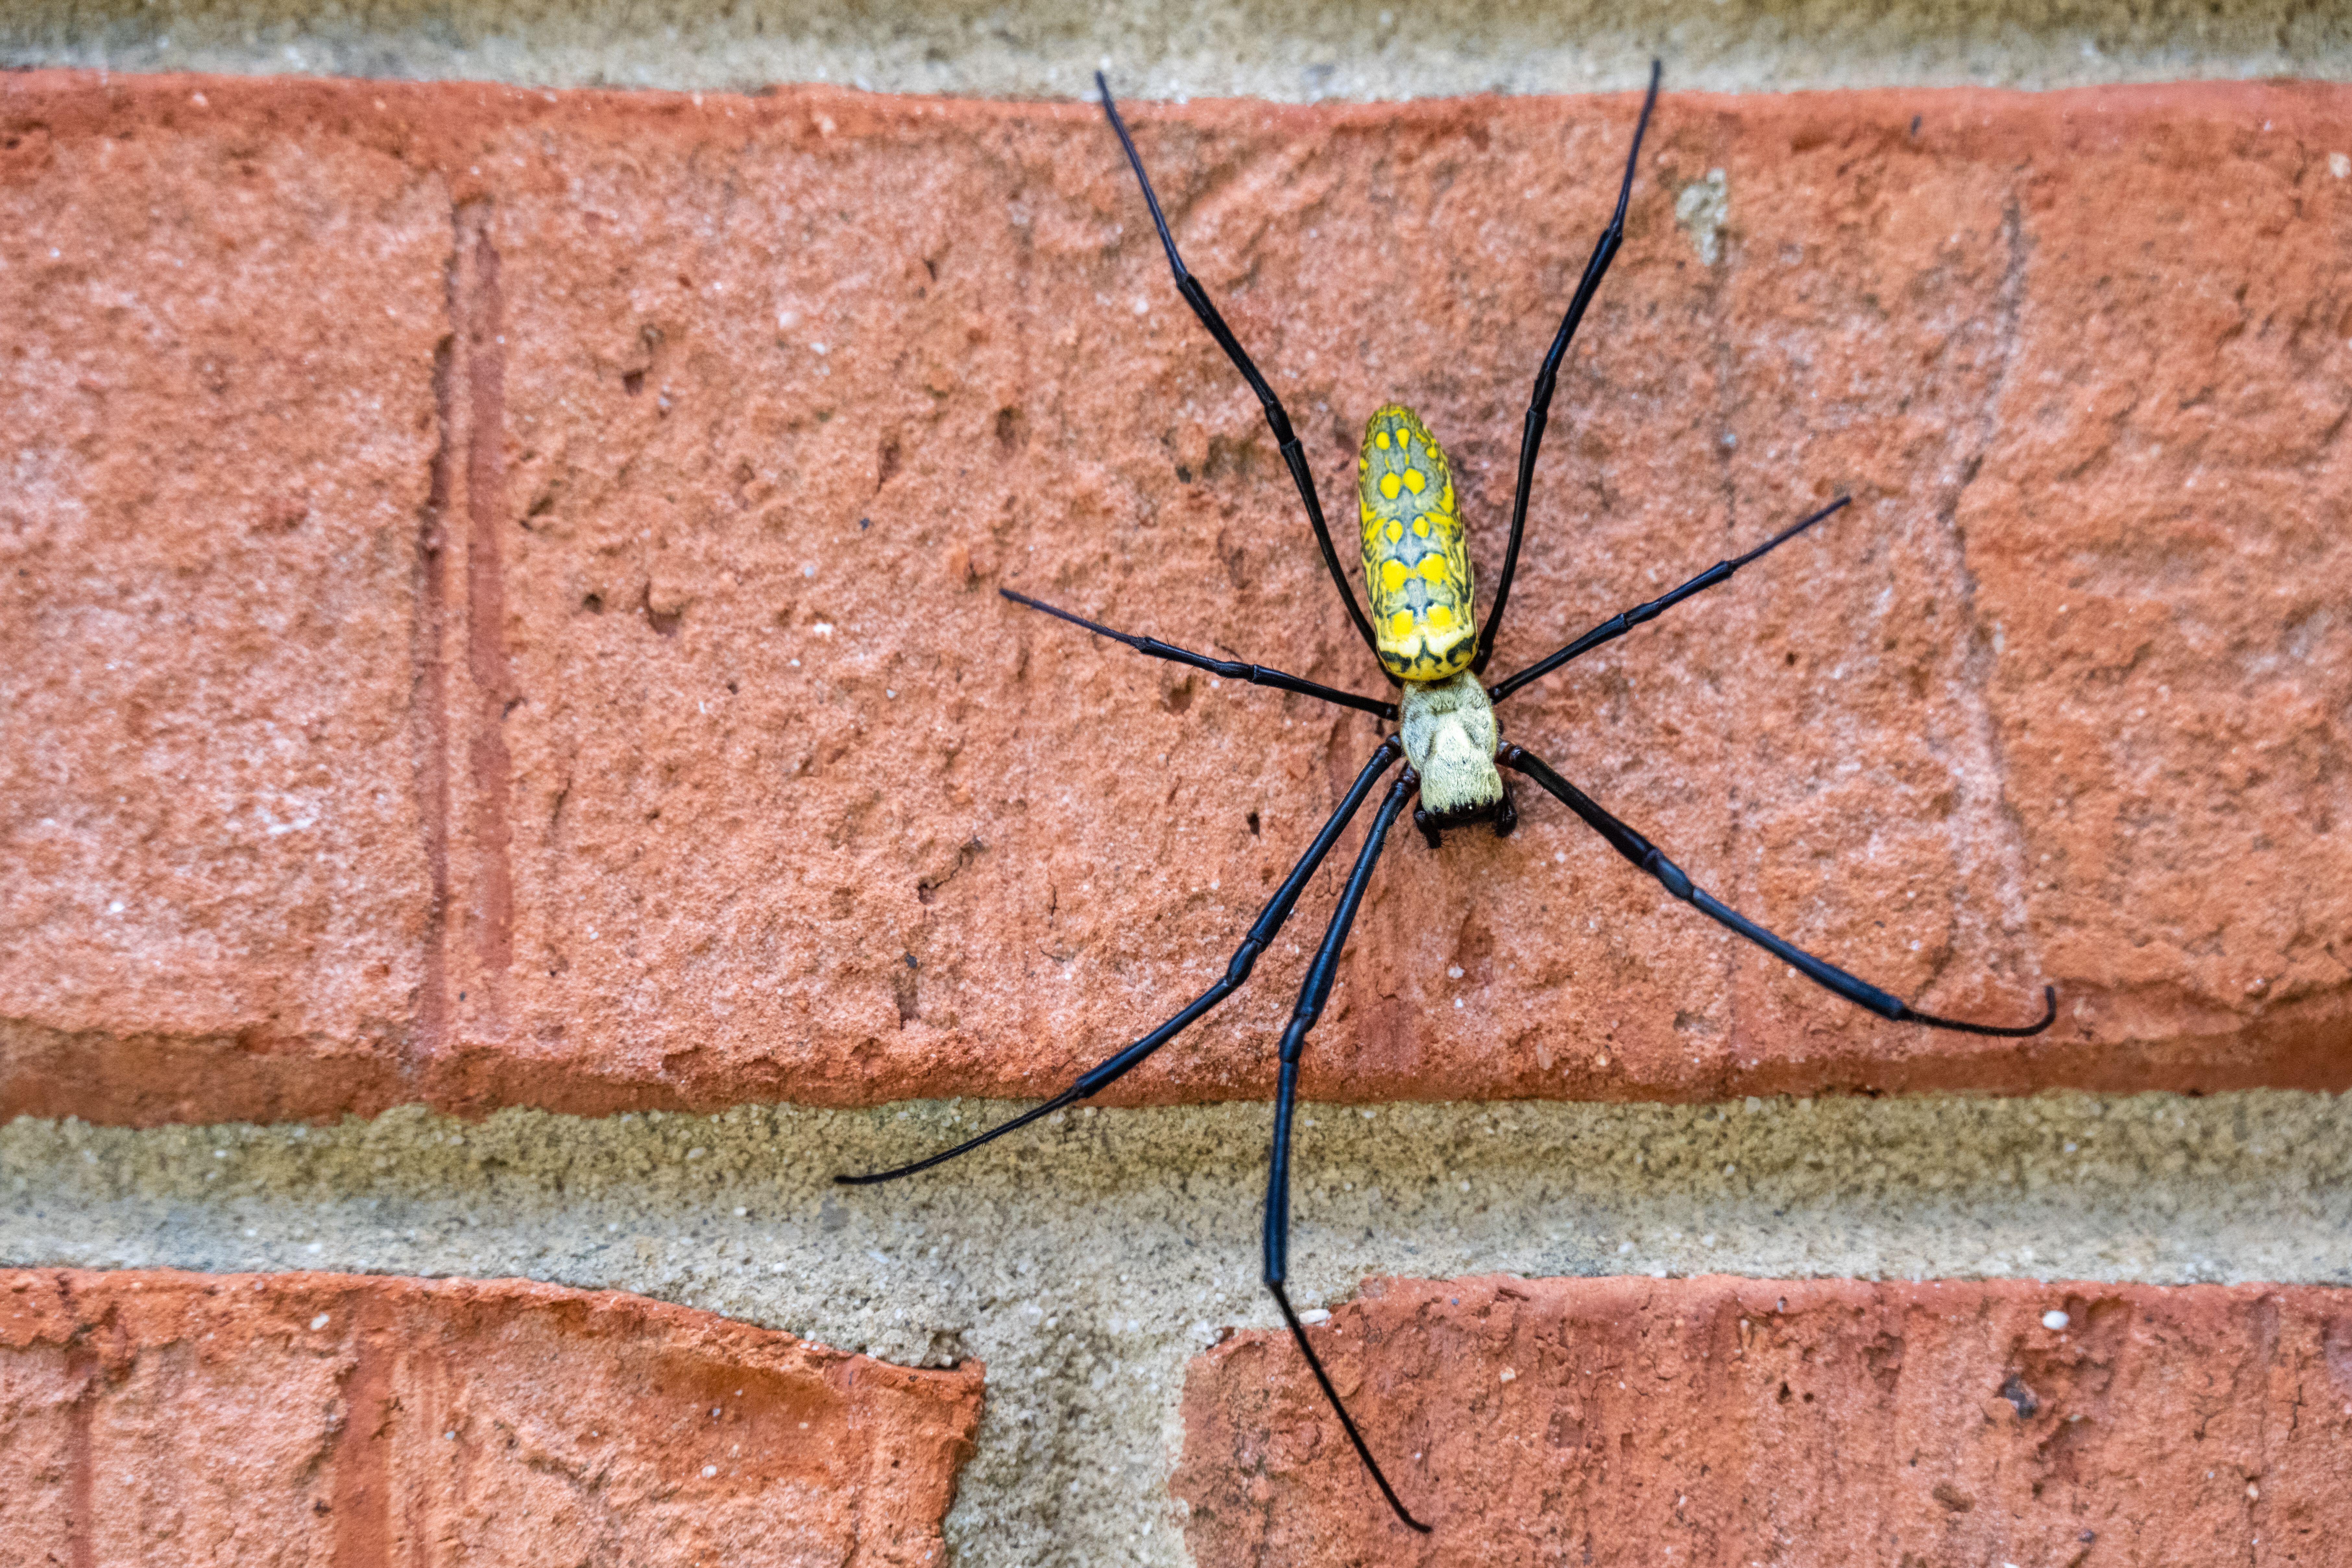 A Joro spider with a yellow and grey body and long black legs on a brick wall